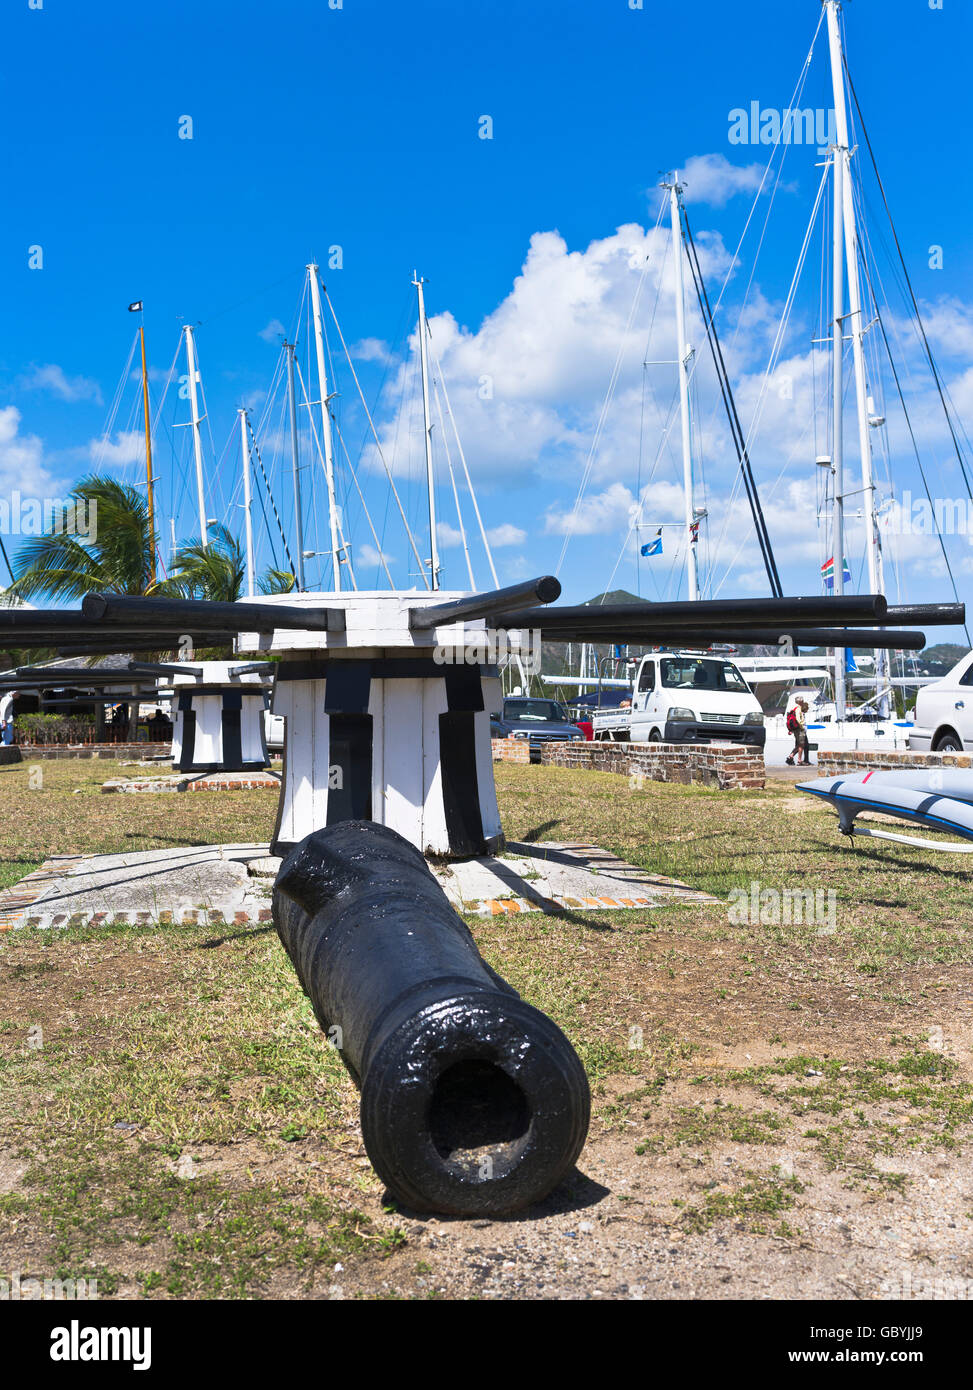 dh Nelsons Dockyard ANTIGUA CARIBBEAN Capstan and yachts English Harbour historical West Indies naval docks Stock Photo